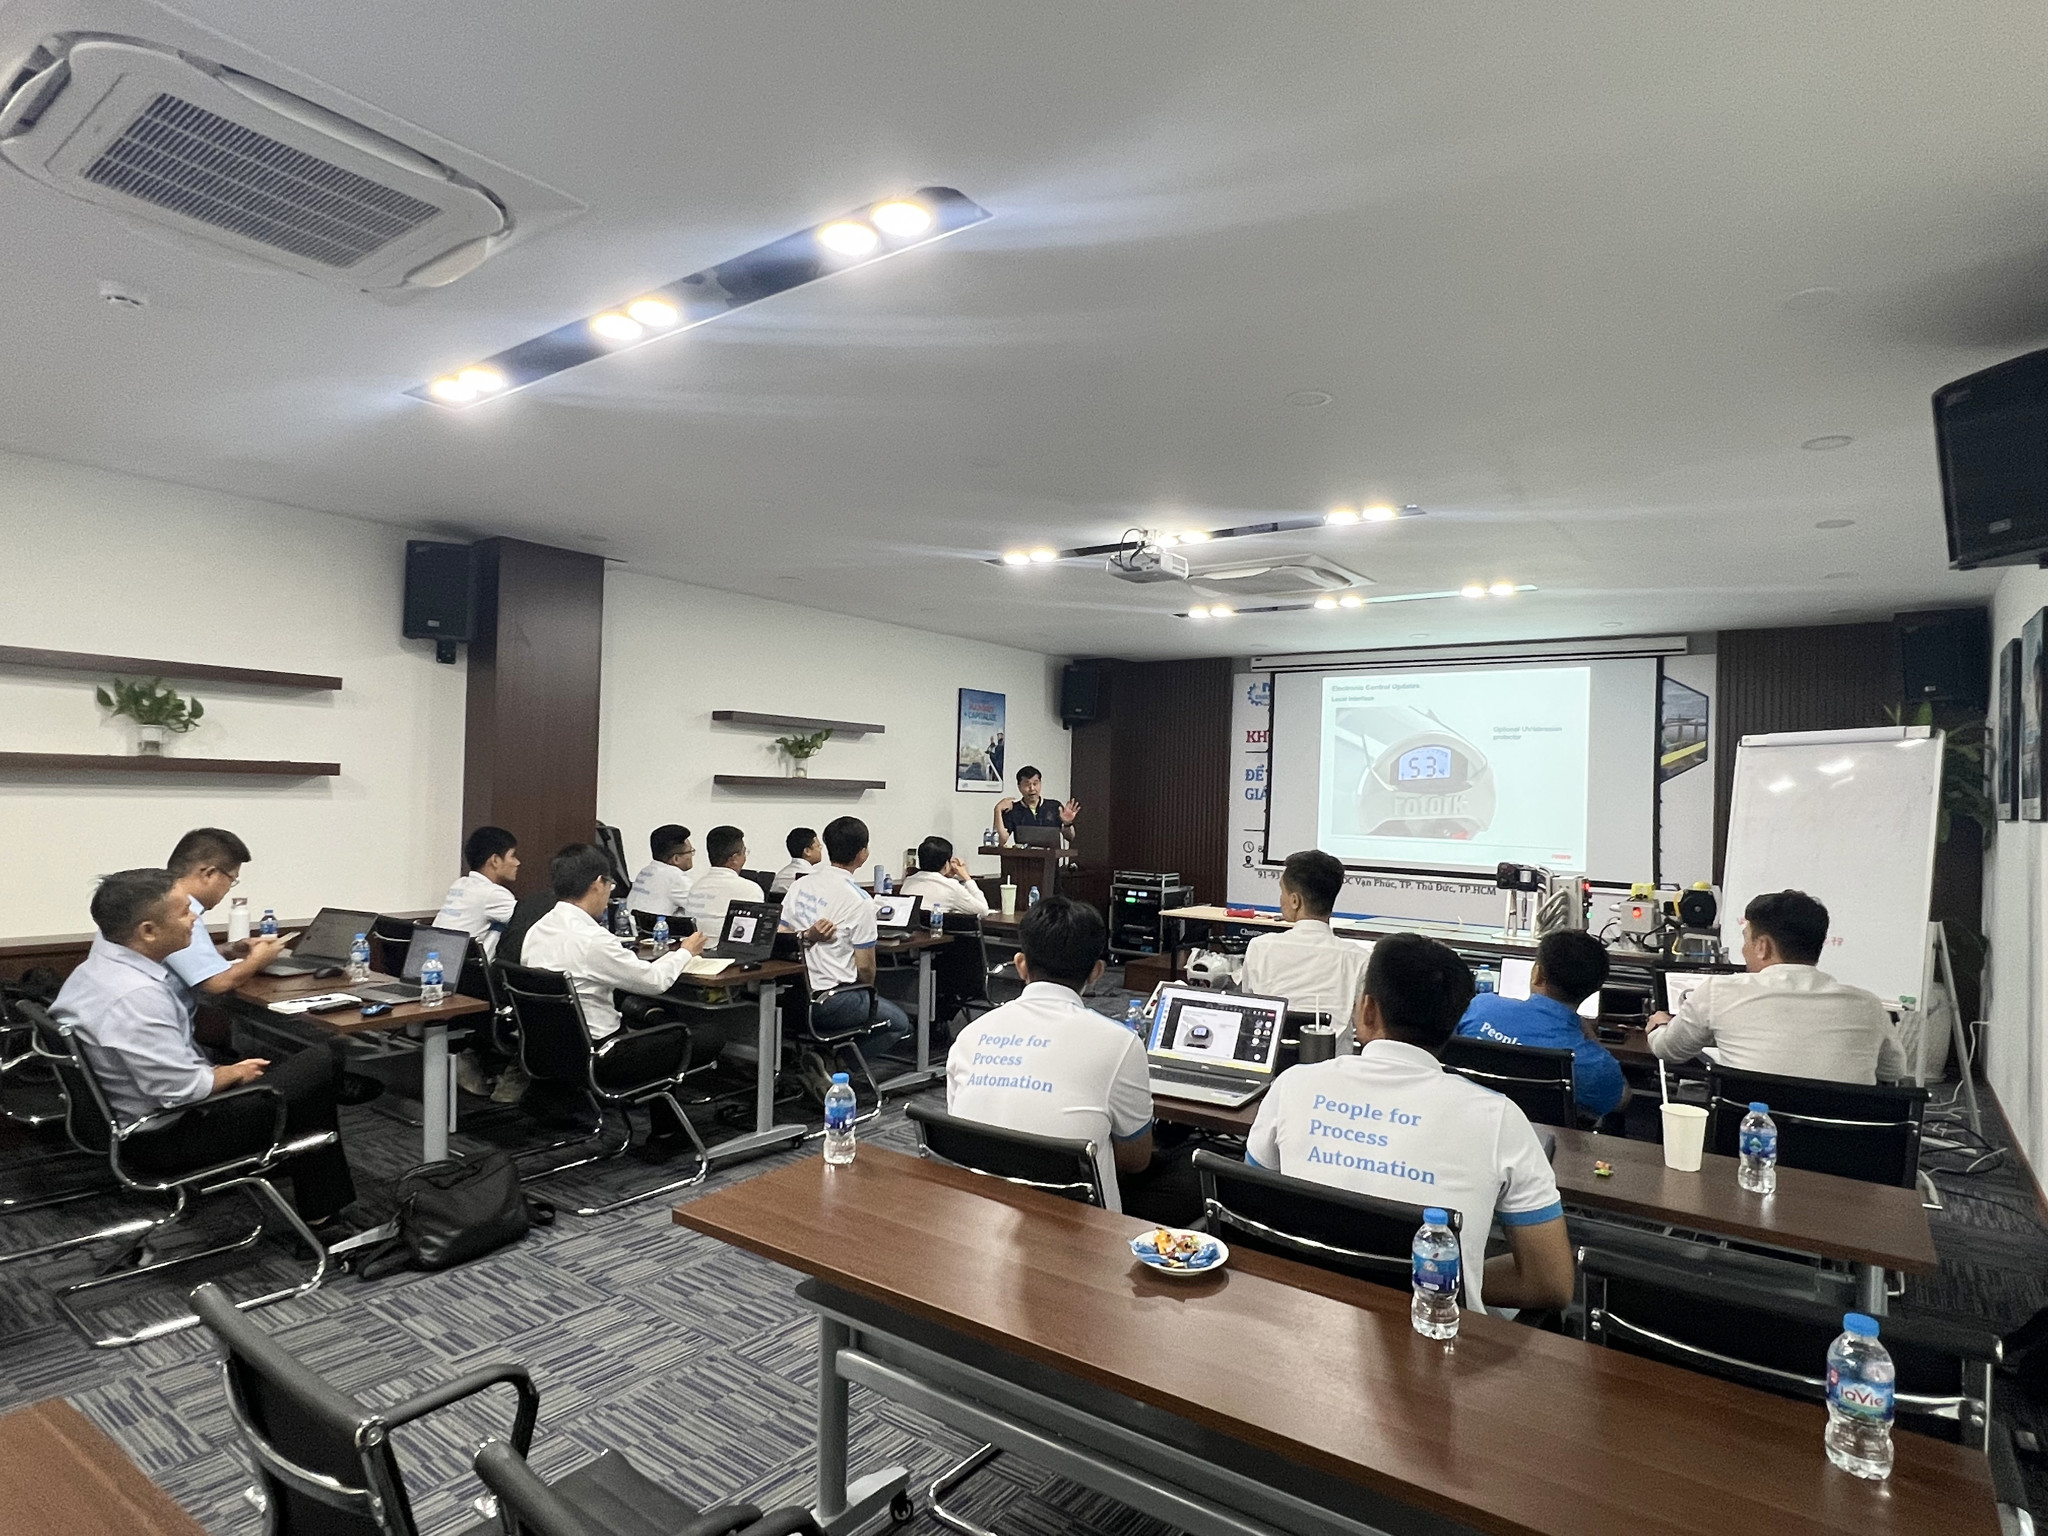 NK Engineering attended a 3-day training course on Rotork actuators